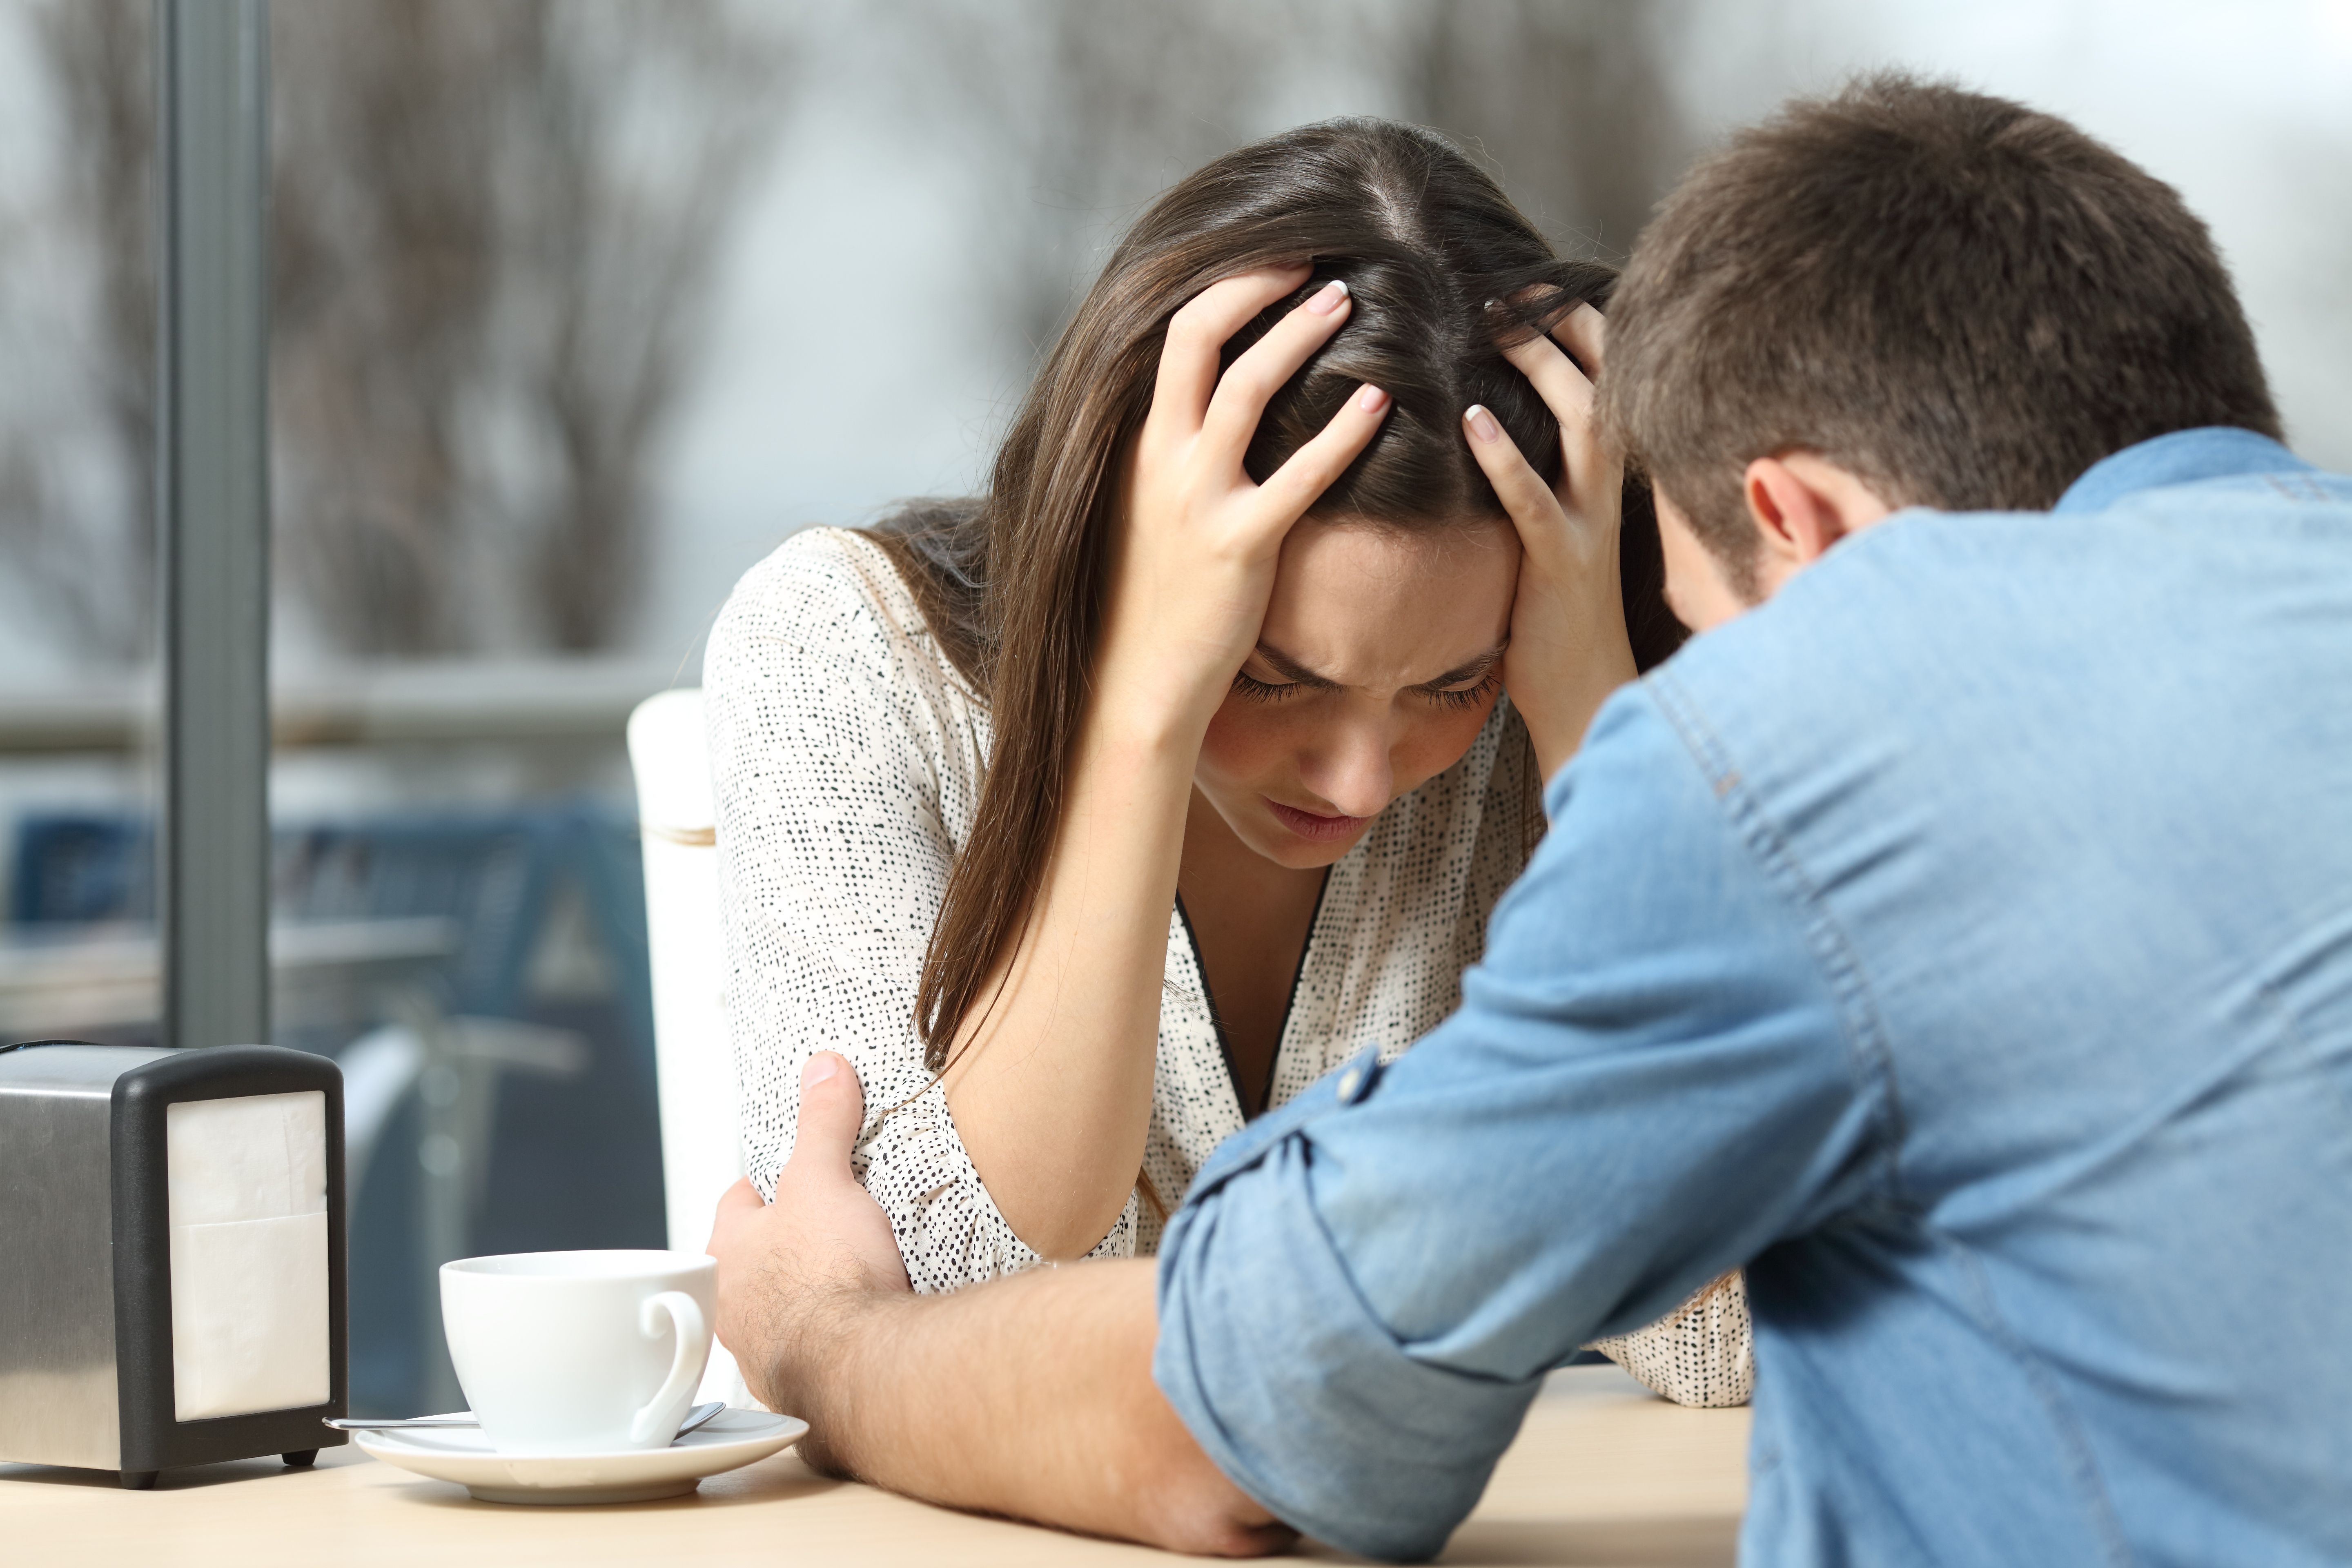 Woman looking stressed with her hands on her head while engaging with a man. | Photo: Shutterstock